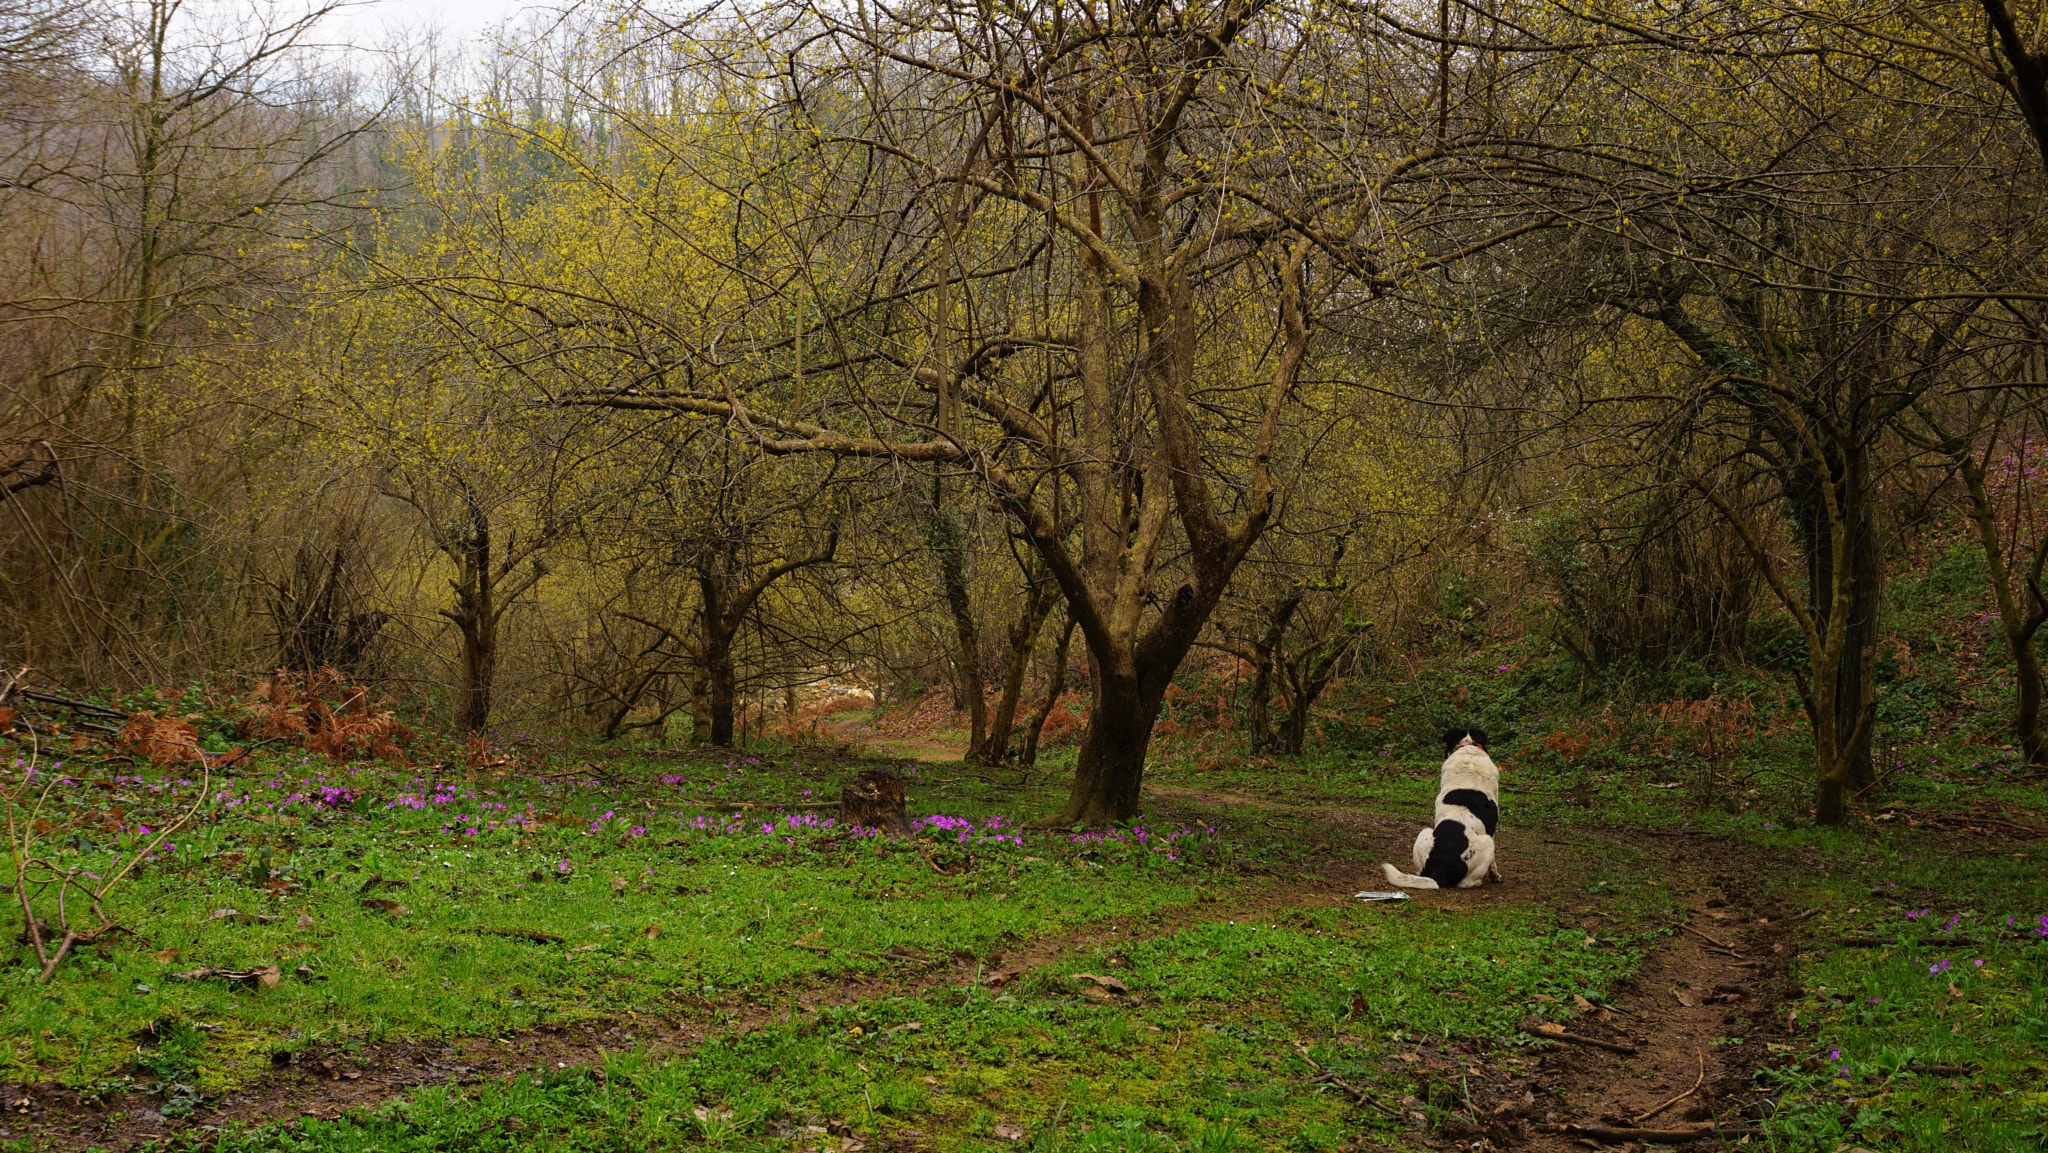 Sony a6000 sample photo. Dog vitali enjoying the sight of cornell cherry trees / in the woods of istanbul photography